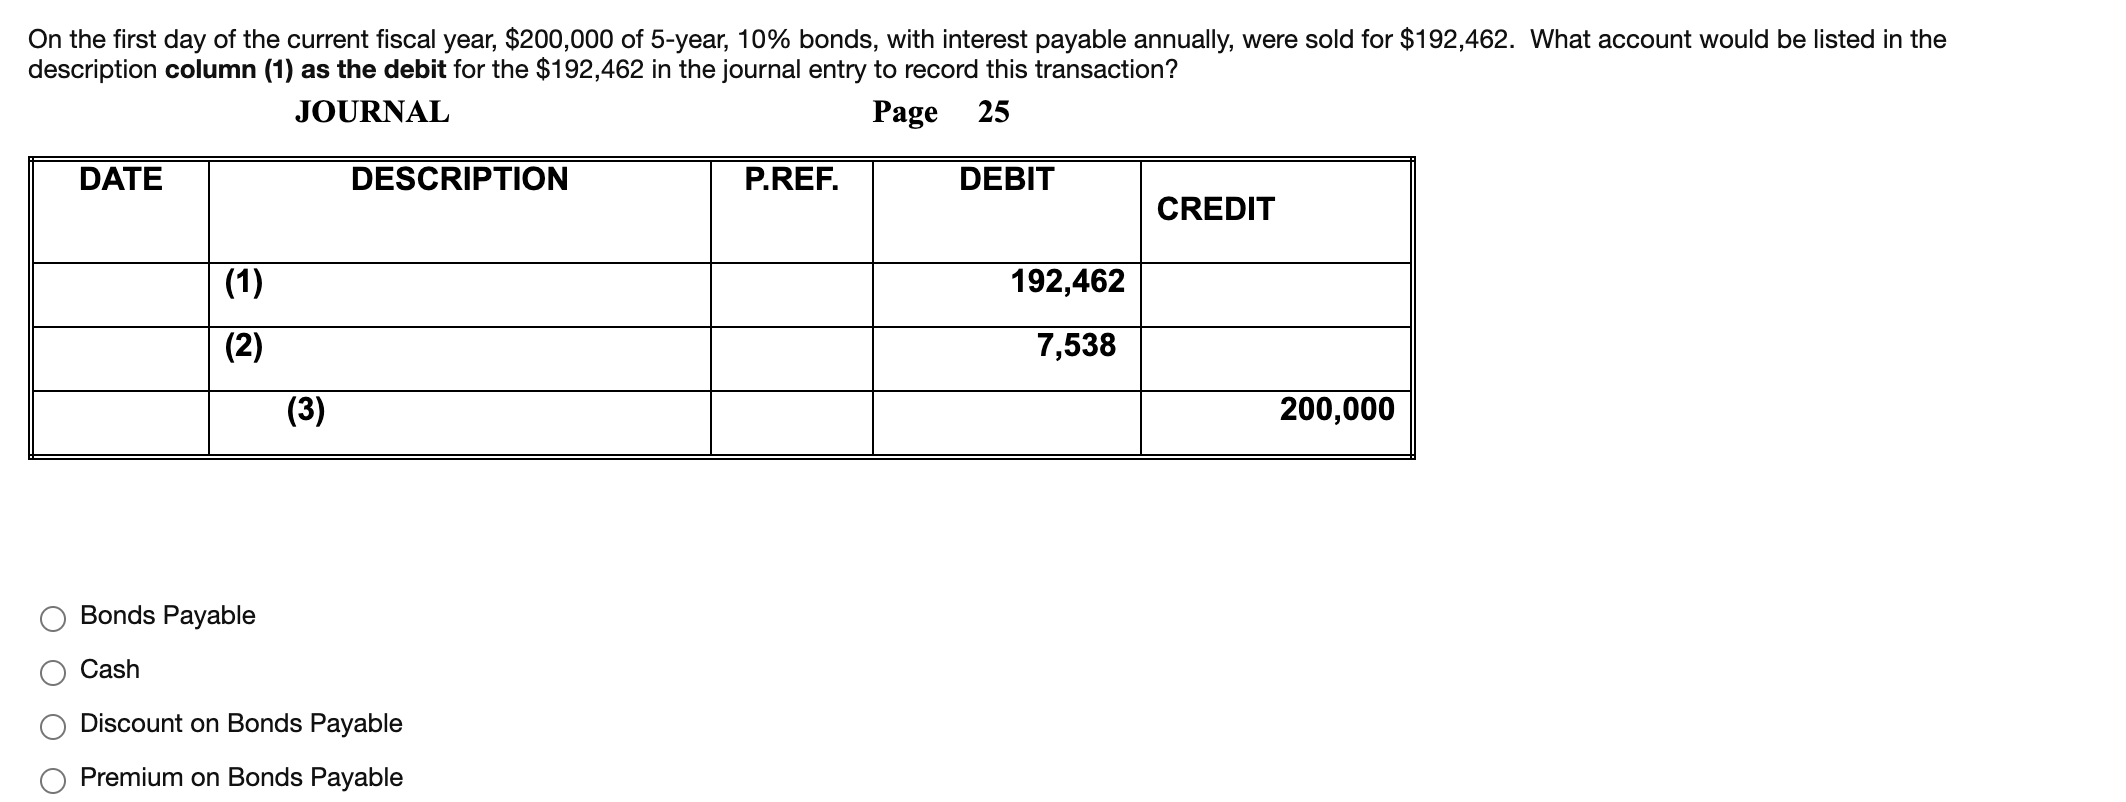 On the first day of the current fiscal year, $200,000 of 5-year, 10% bonds, with interest payable annually, were sold for $192,462. What account would be listed in the
description column (1) as the debit for the $192,462 in the journal entry to record this transaction?
JOURNAL
Page
25
DATE
DESCRIPTION
P.REF.
DEBIT
CREDIT
(1)
192,462
(2)
7,538
(3)
200,000
Bonds Payable
Cash
Discount on Bonds Payable
Premium on Bonds Payable
